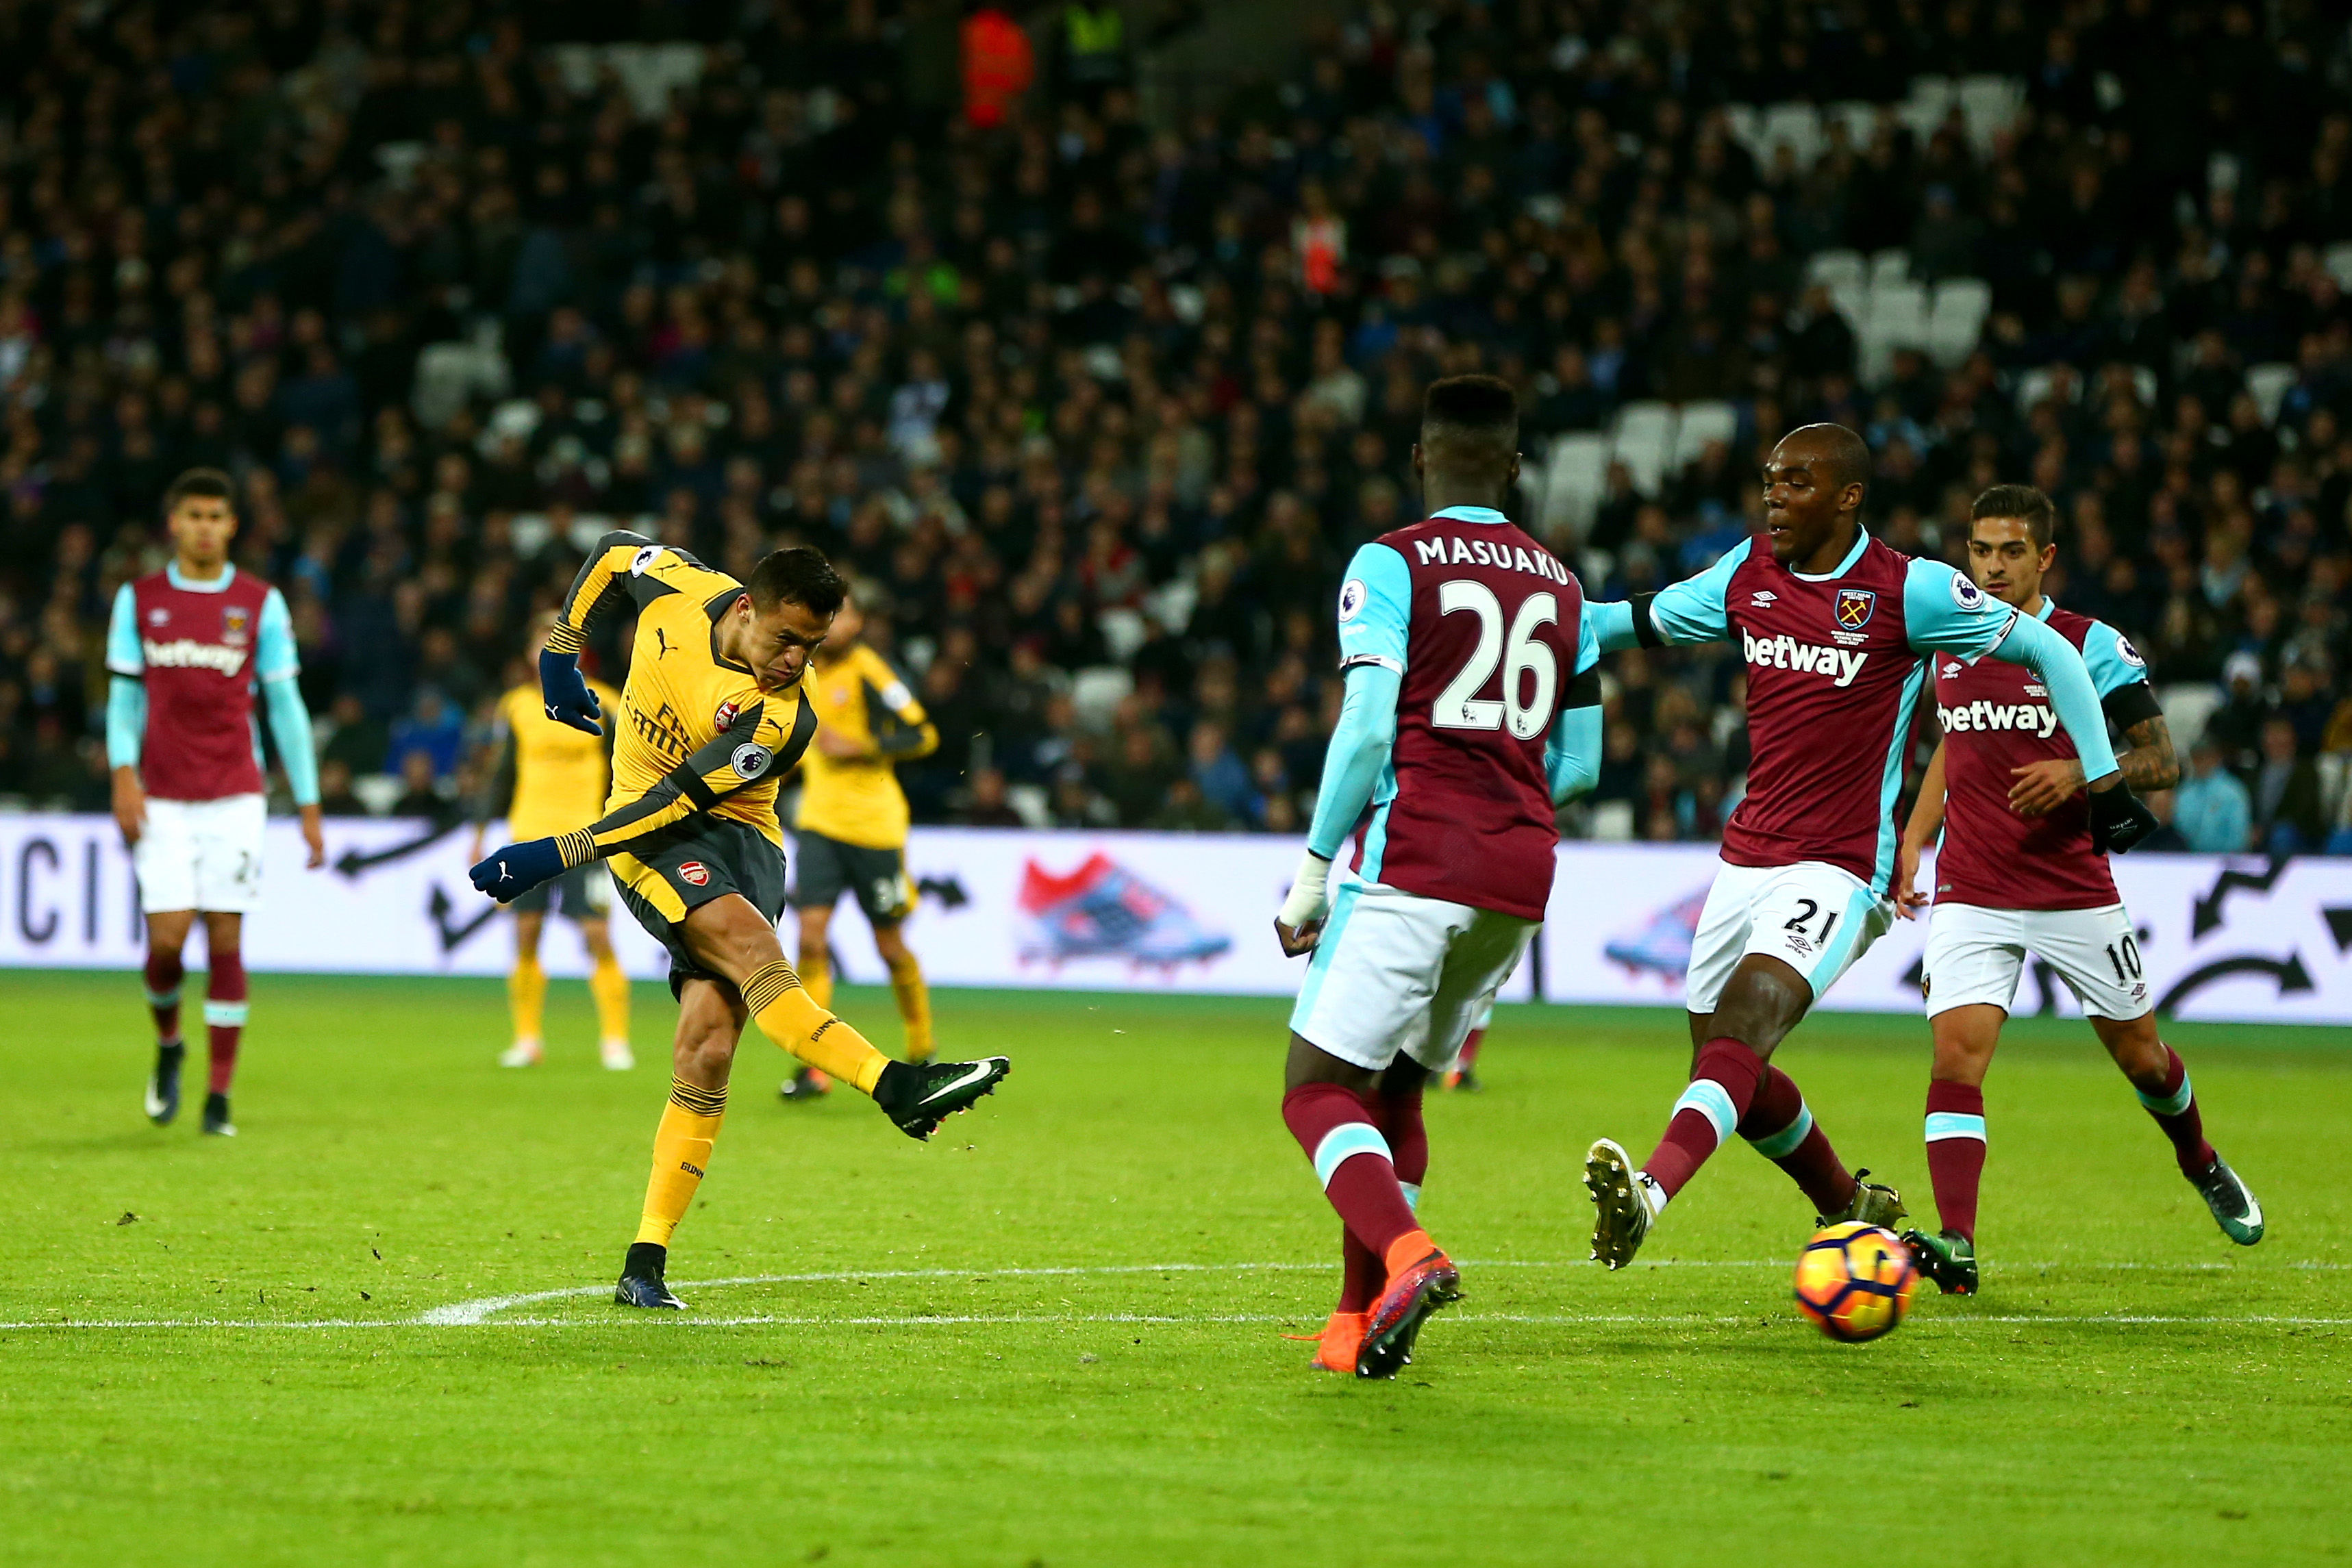 LONDON, ENGLAND - DECEMBER 03:  Alexis Sanchez of Arsenal scores their third goal during the Premier League match between West Ham United and Arsenal at London Stadium on December 3, 2016 in London, England.  (Photo by Jordan Mansfield/Getty Images)